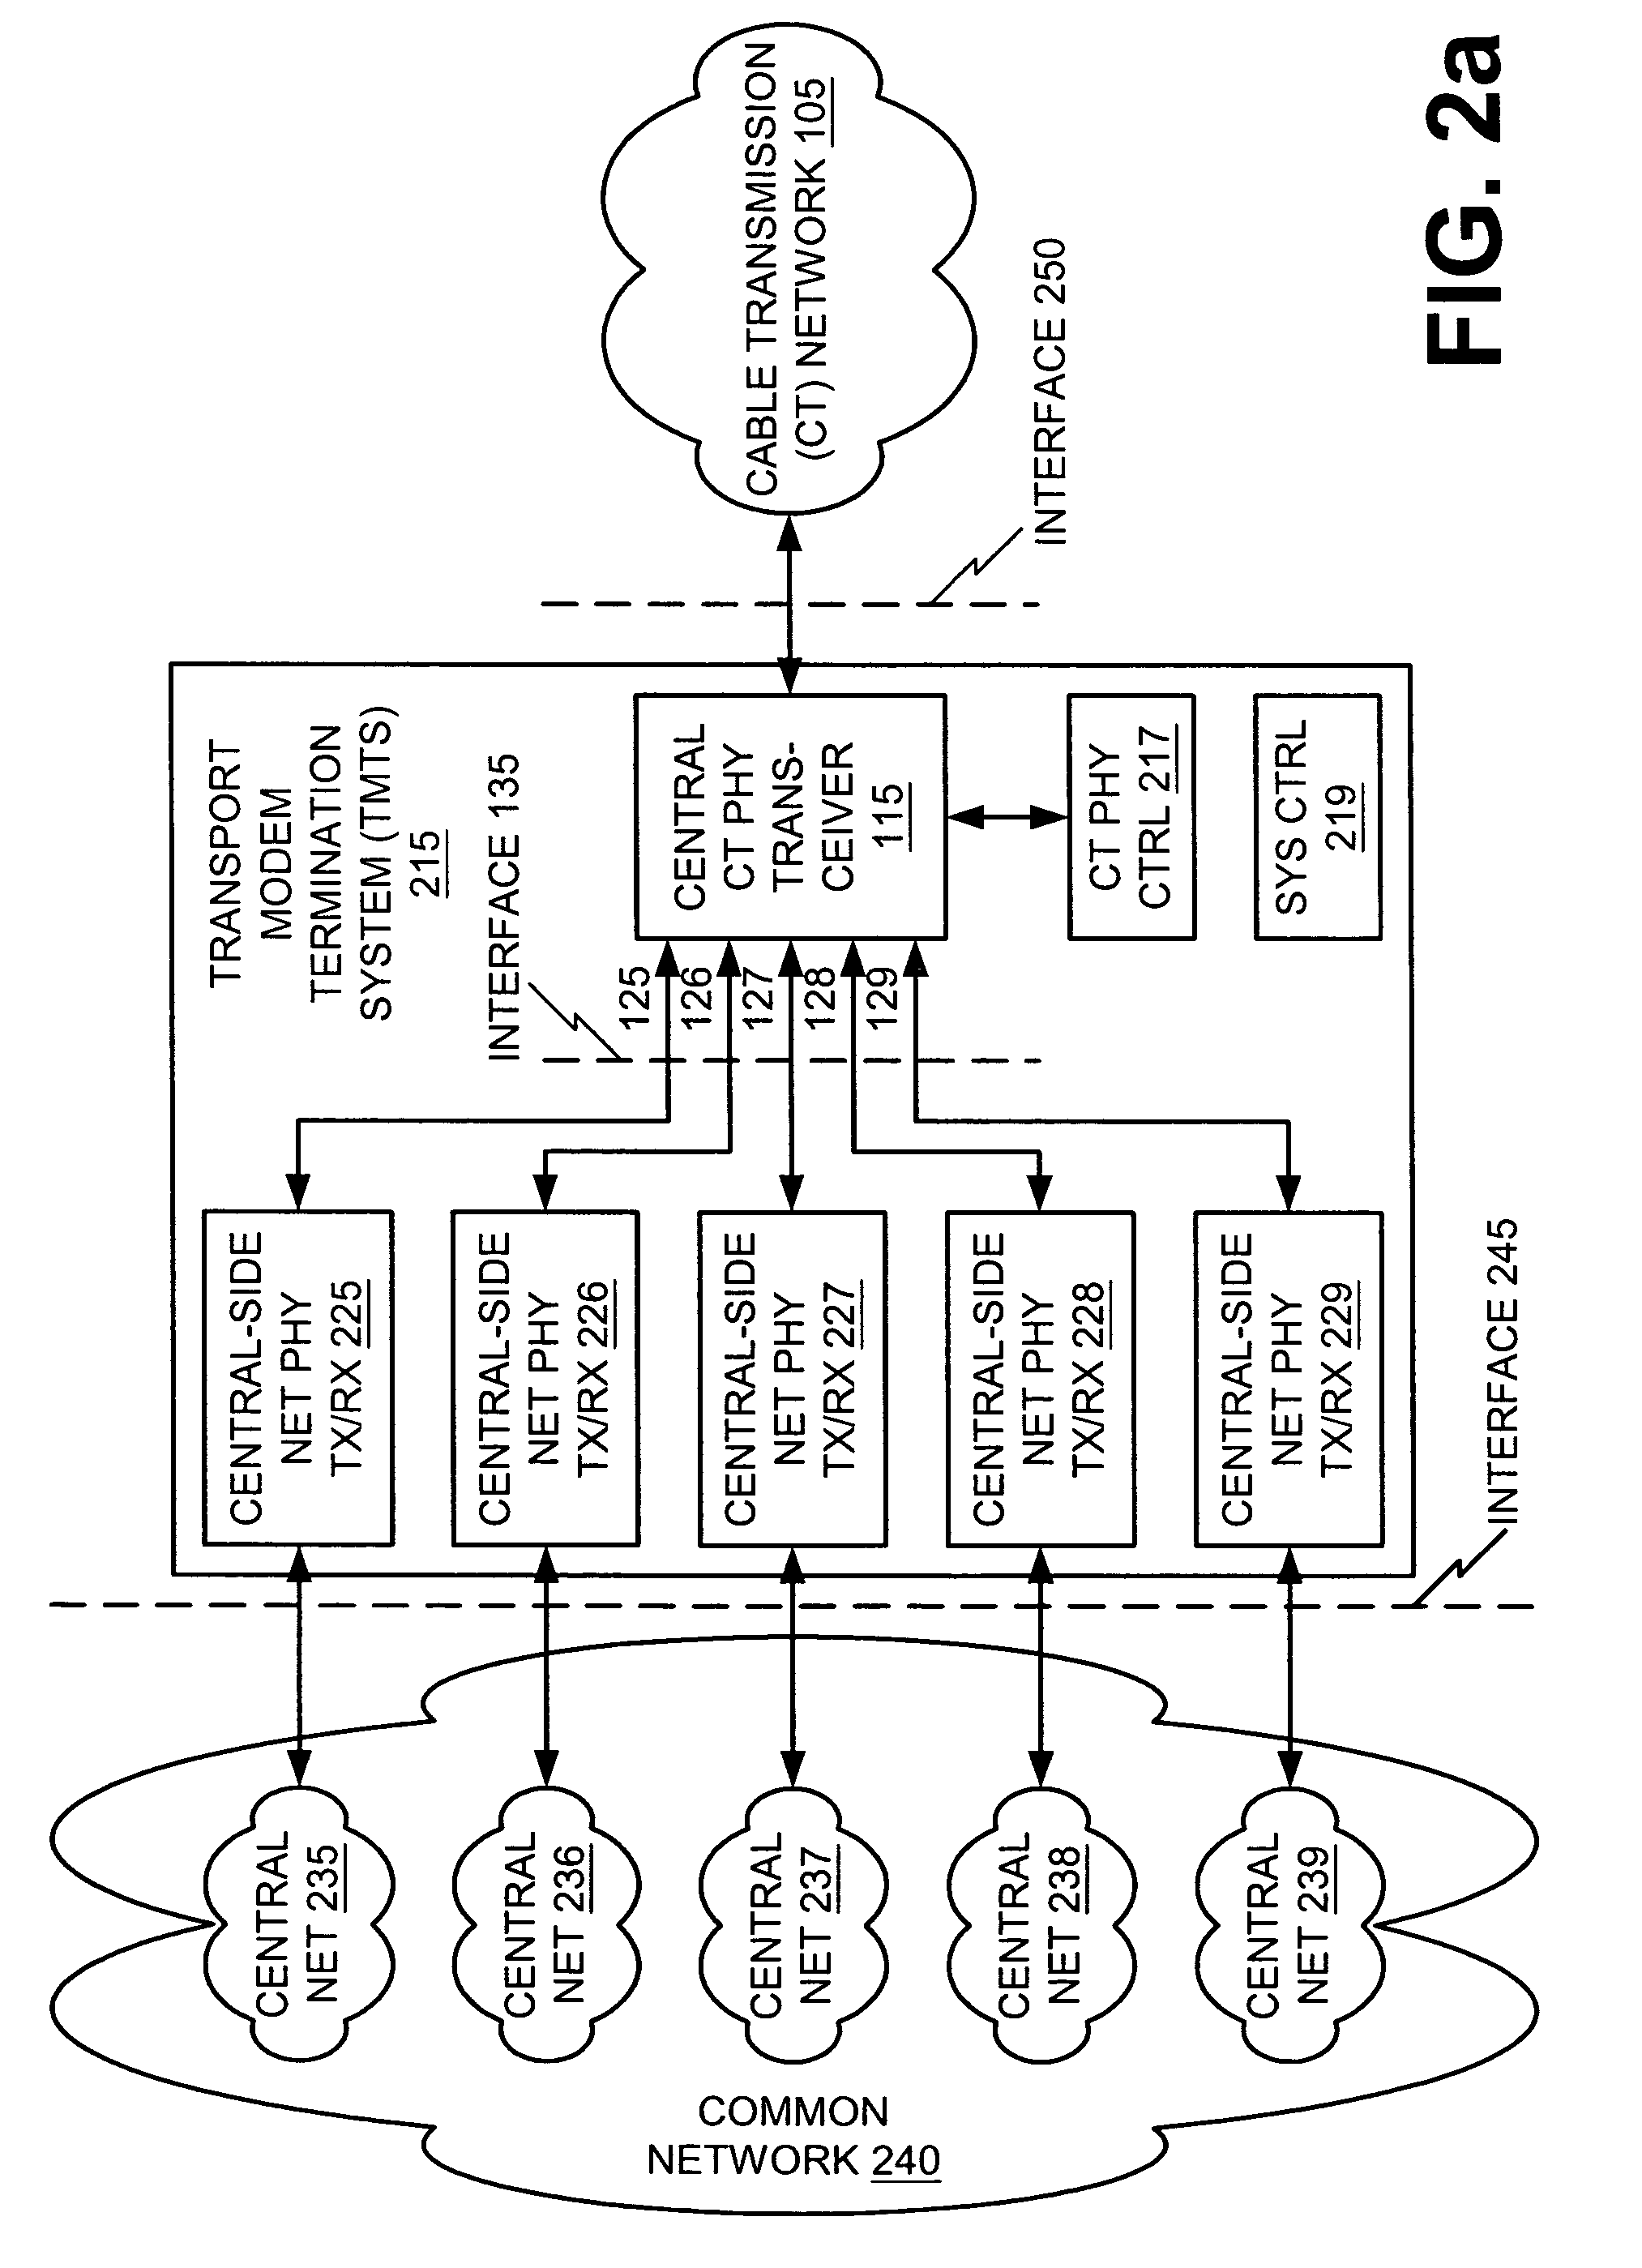 Multiplexing octets from a data flow over MPEG packets